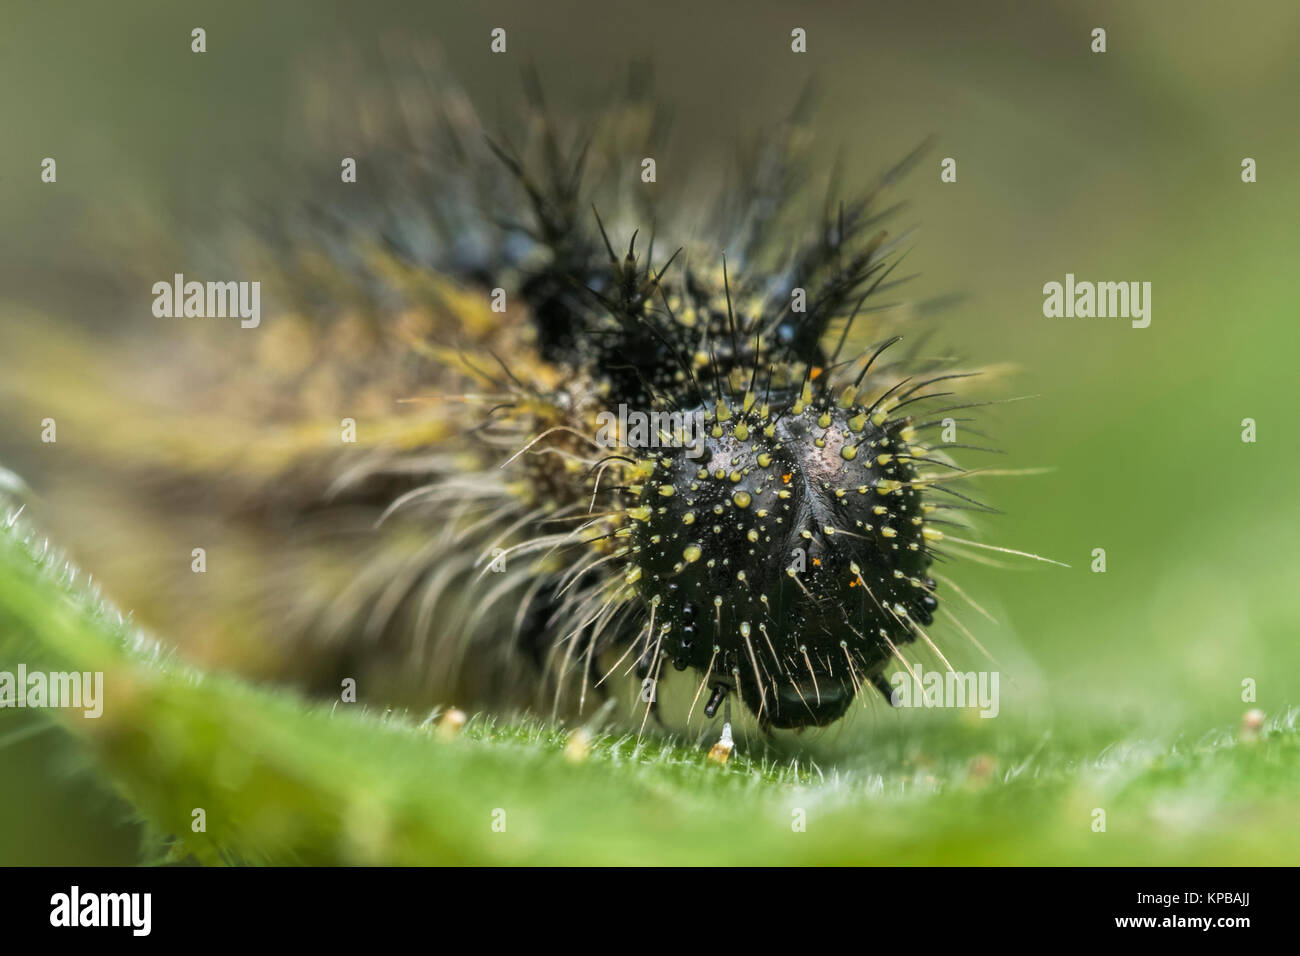 Small Tortoiseshell caterpillar (Aglais urticae) close up view of its head. Cabragh Wetlands, Thurles, Tipperary, Ireland. Stock Photo